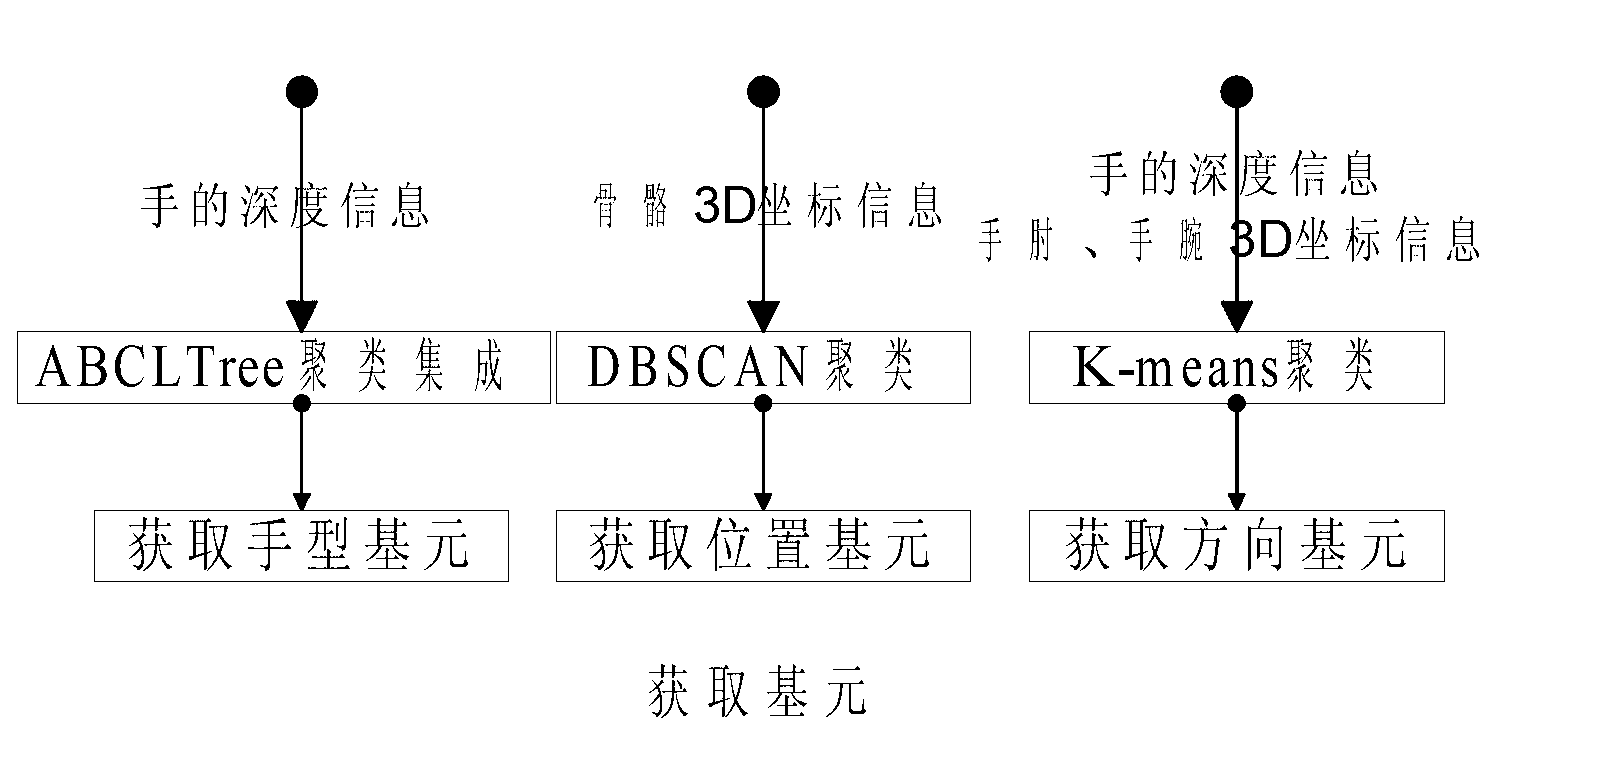 Chinese sign language recognition method based on kinect